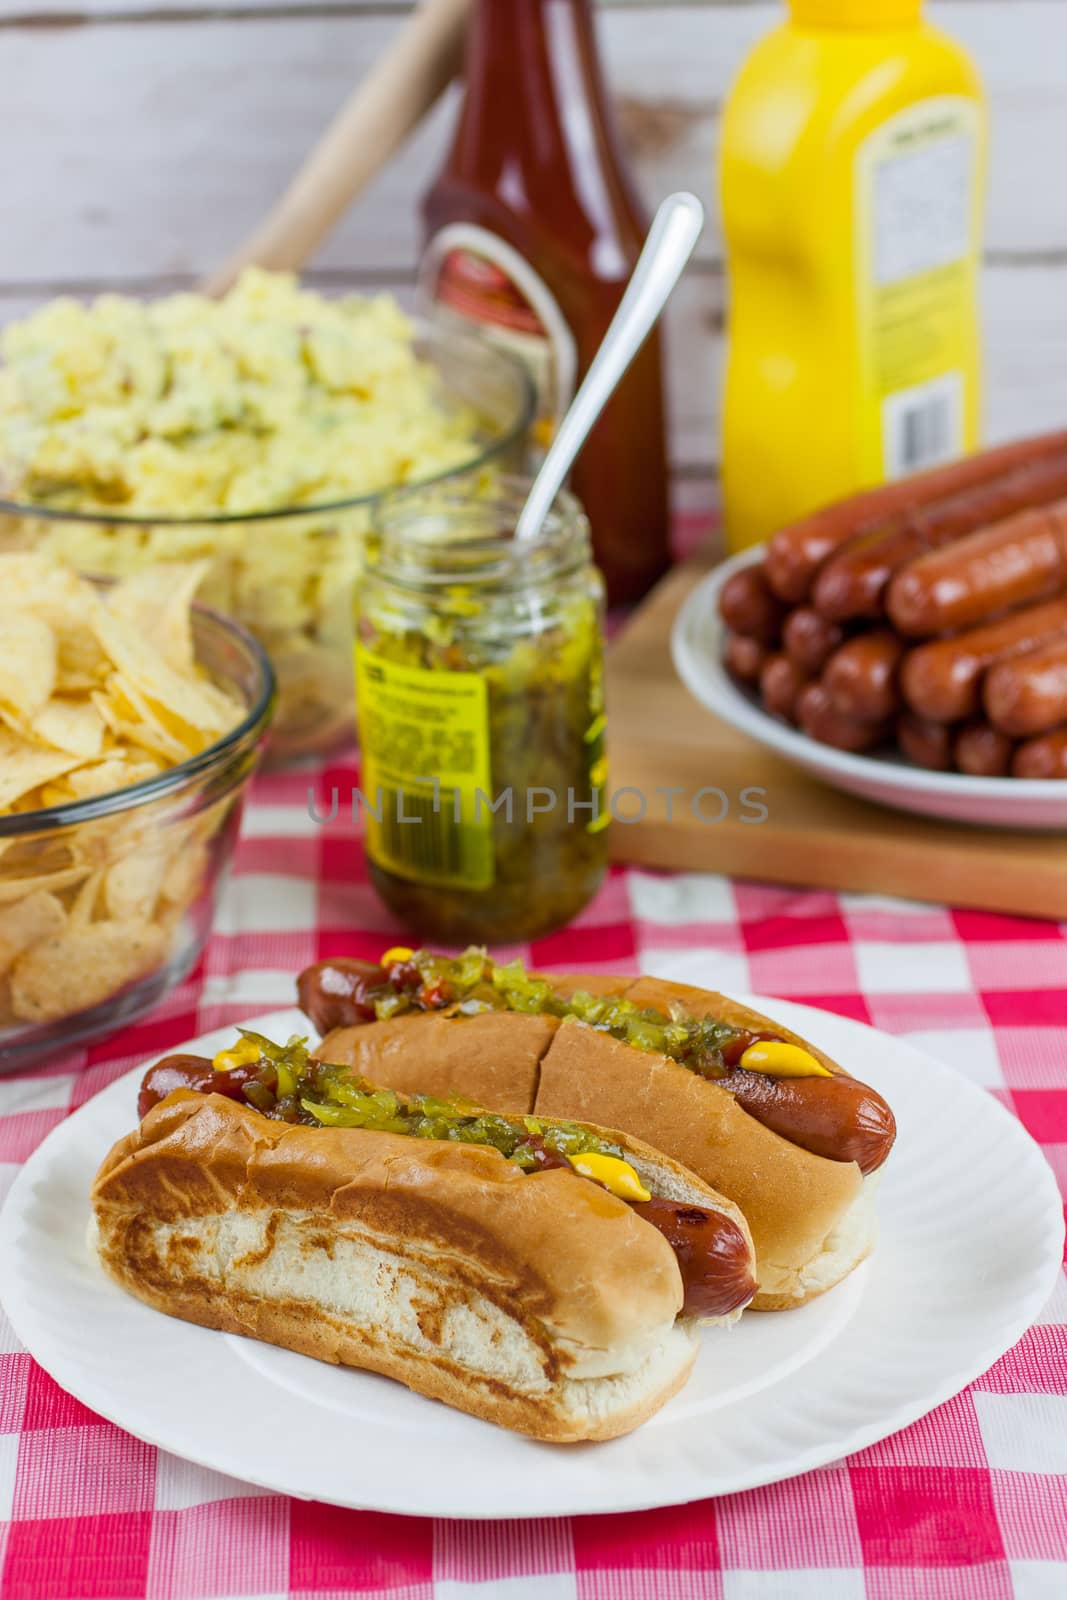 Grilled hot dogs on a paper plate sitting on a table with potato salad, chips, and condiments.